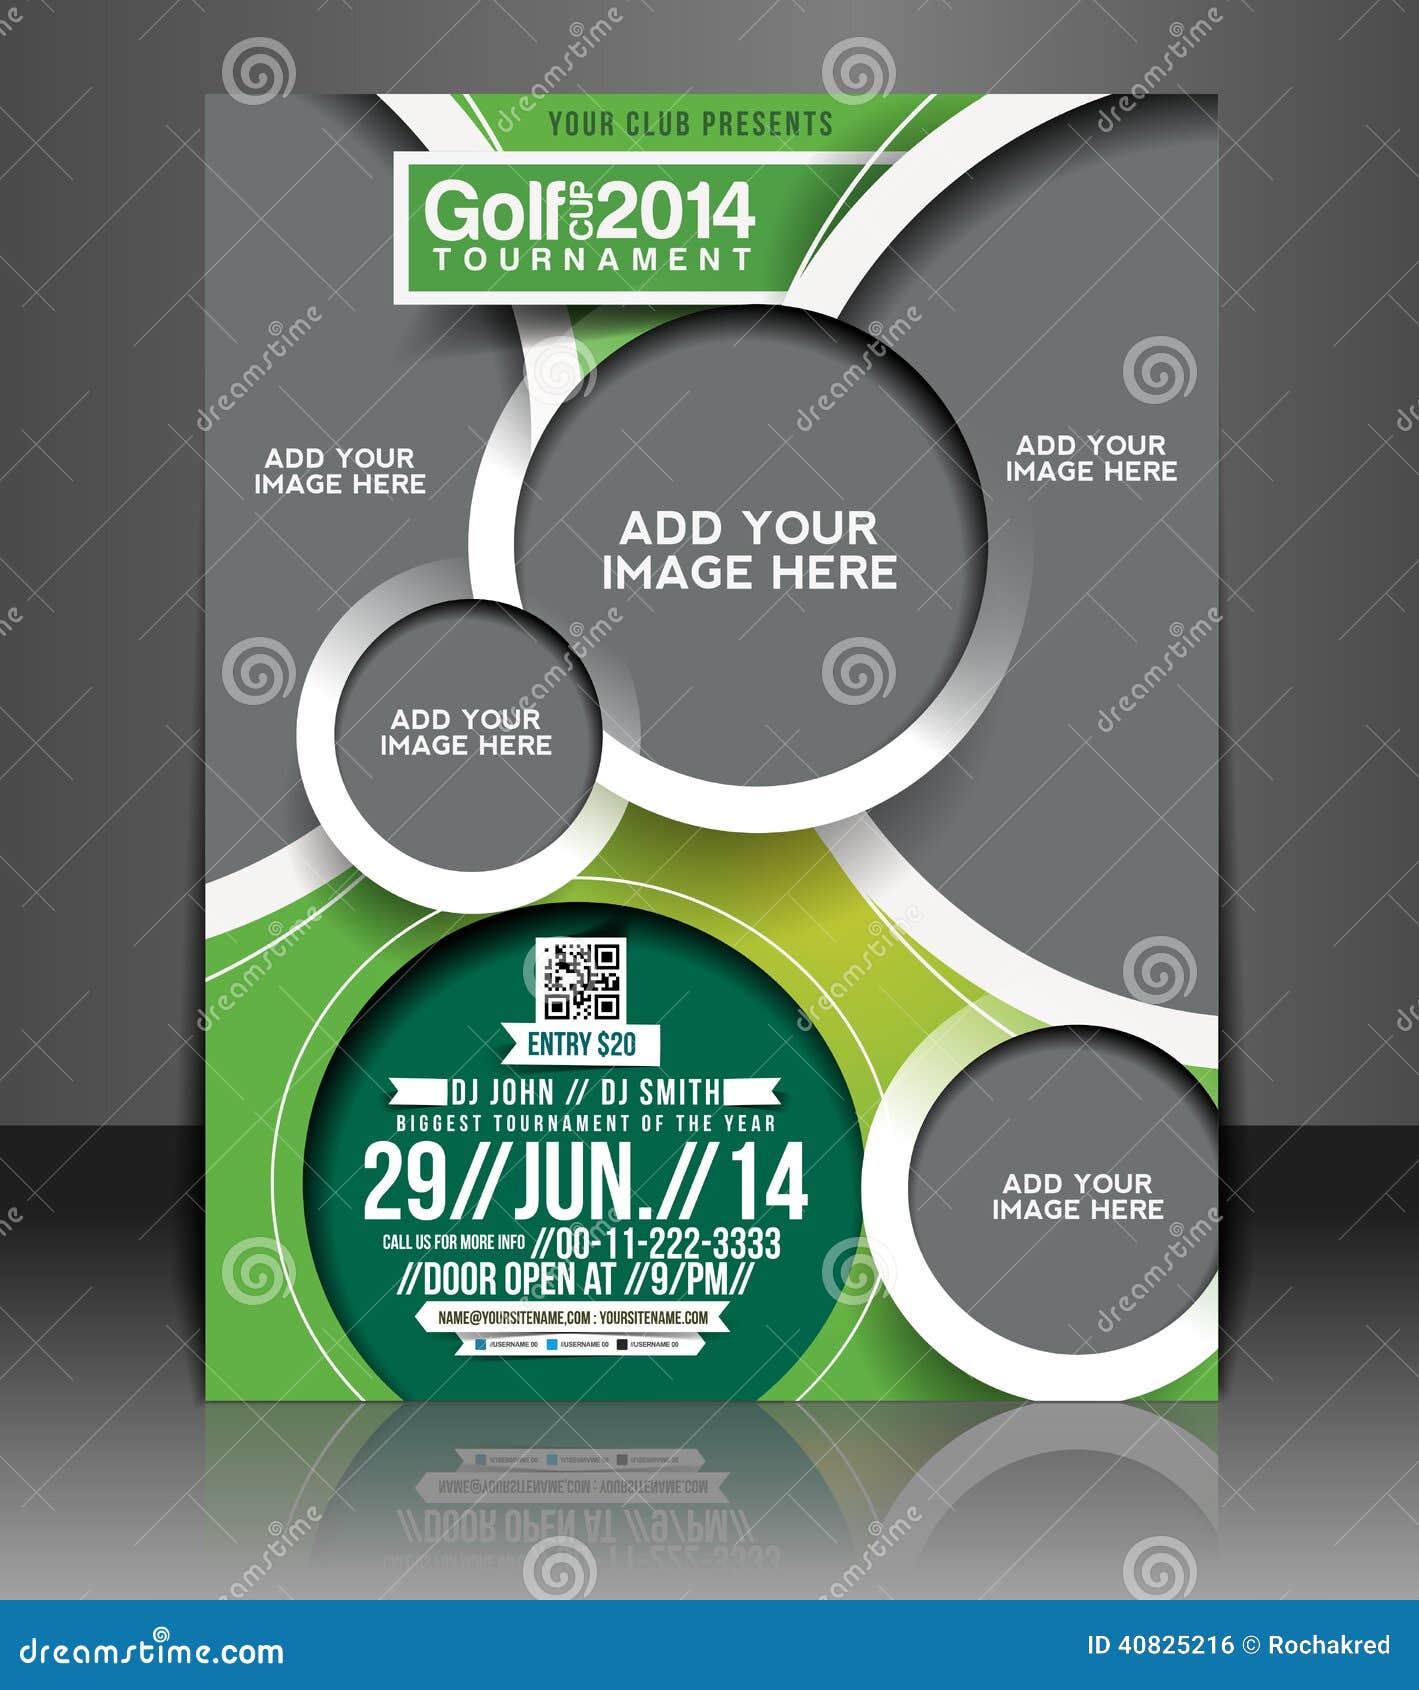 Golf Tournament Flyer Template Download Free from thumbs.dreamstime.com